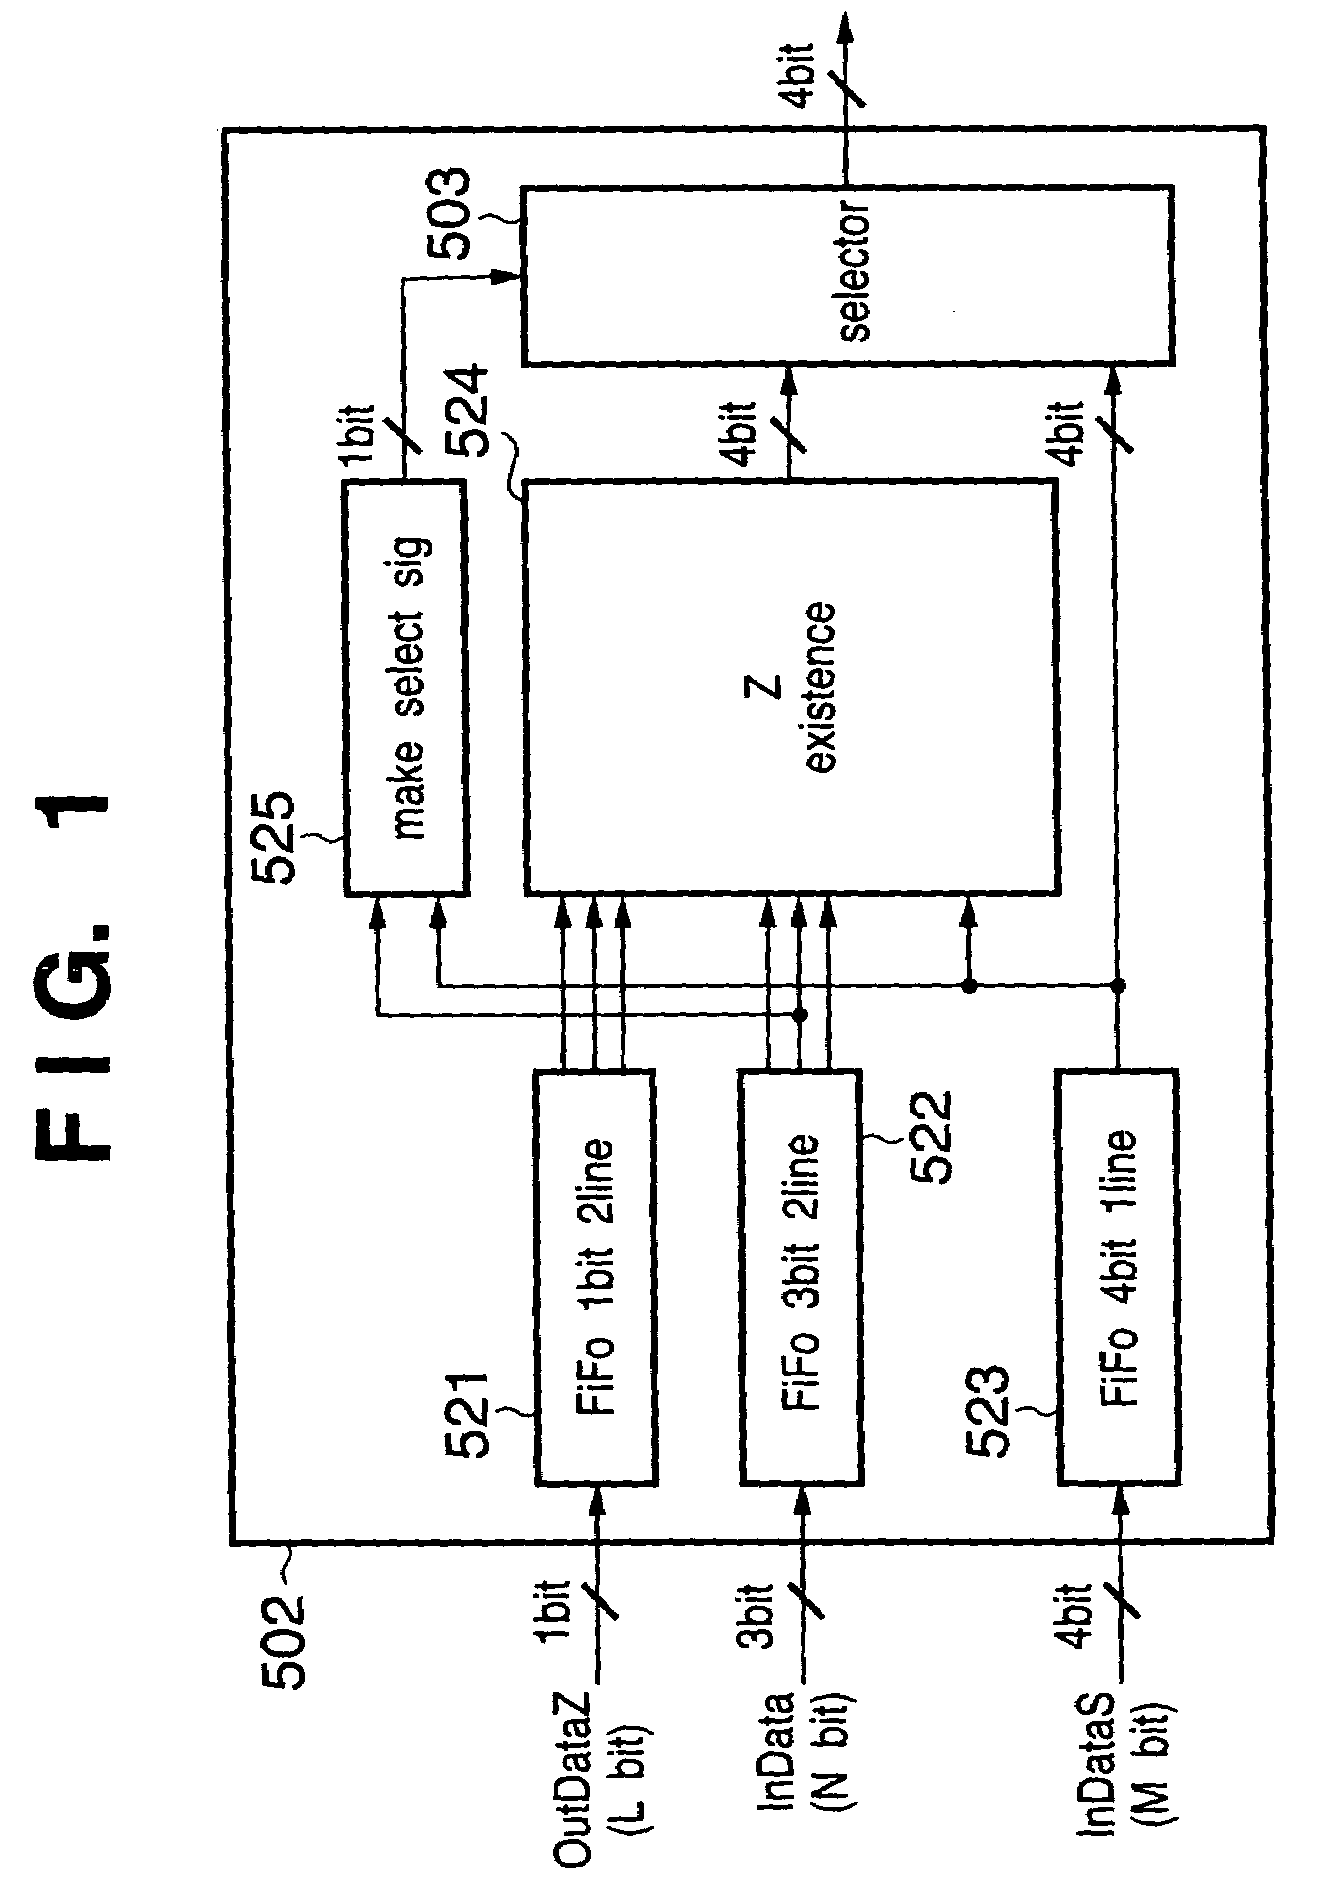 Image processing apparatus and image processing method for suppressing jaggies in the edge portions of image